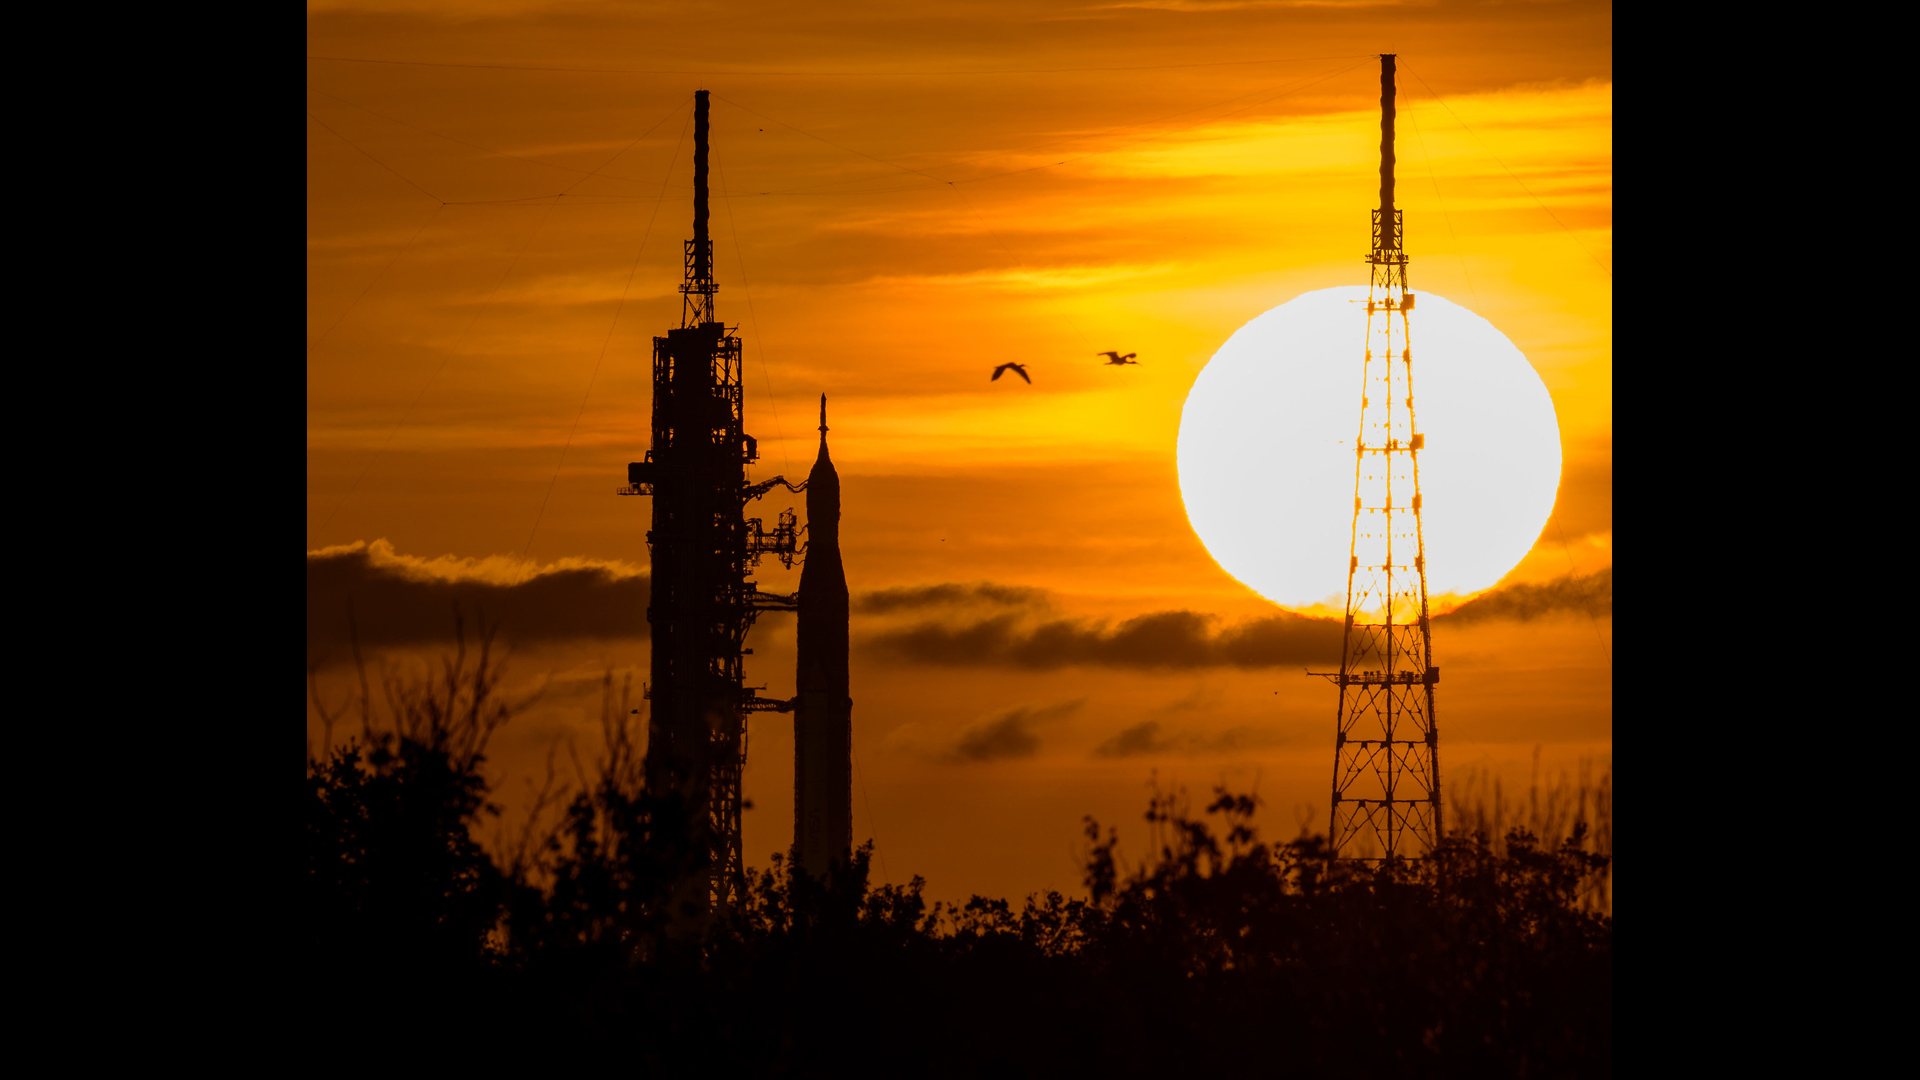 A stunning sunrise image of NASA's Space Launch System moon rocket three days before its second attempt to launch for the groundbreaking Artemis 1 mission.